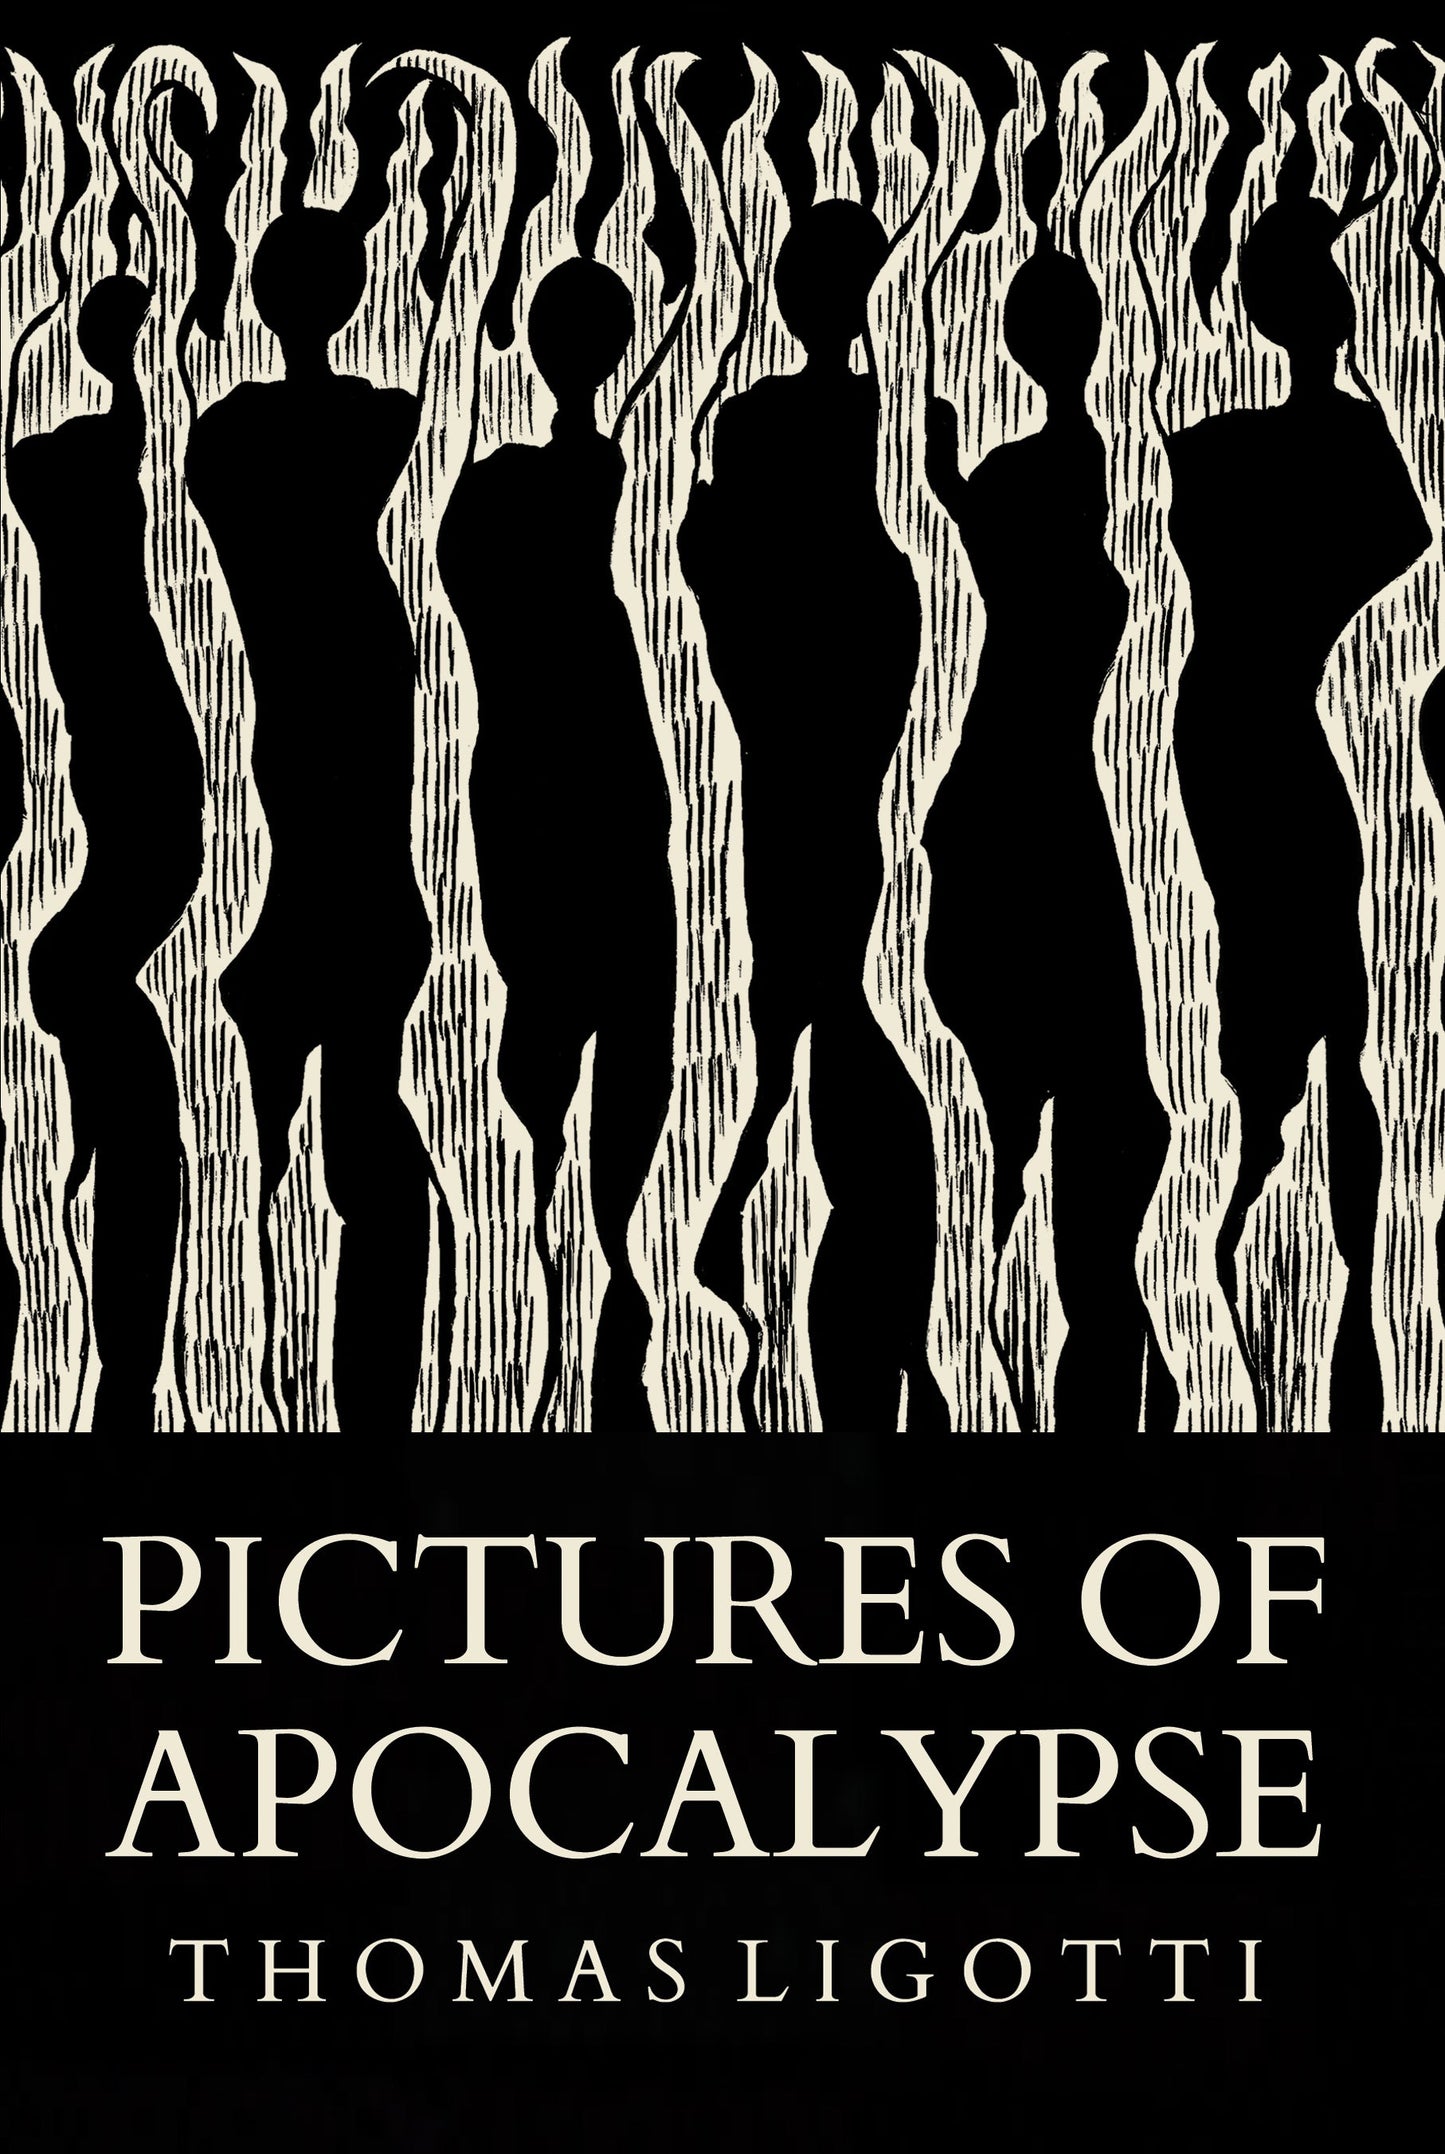 Pictures of Apocalypse and Paradoxes from Hell by Thomas Ligotti - Signed deluxe edition set